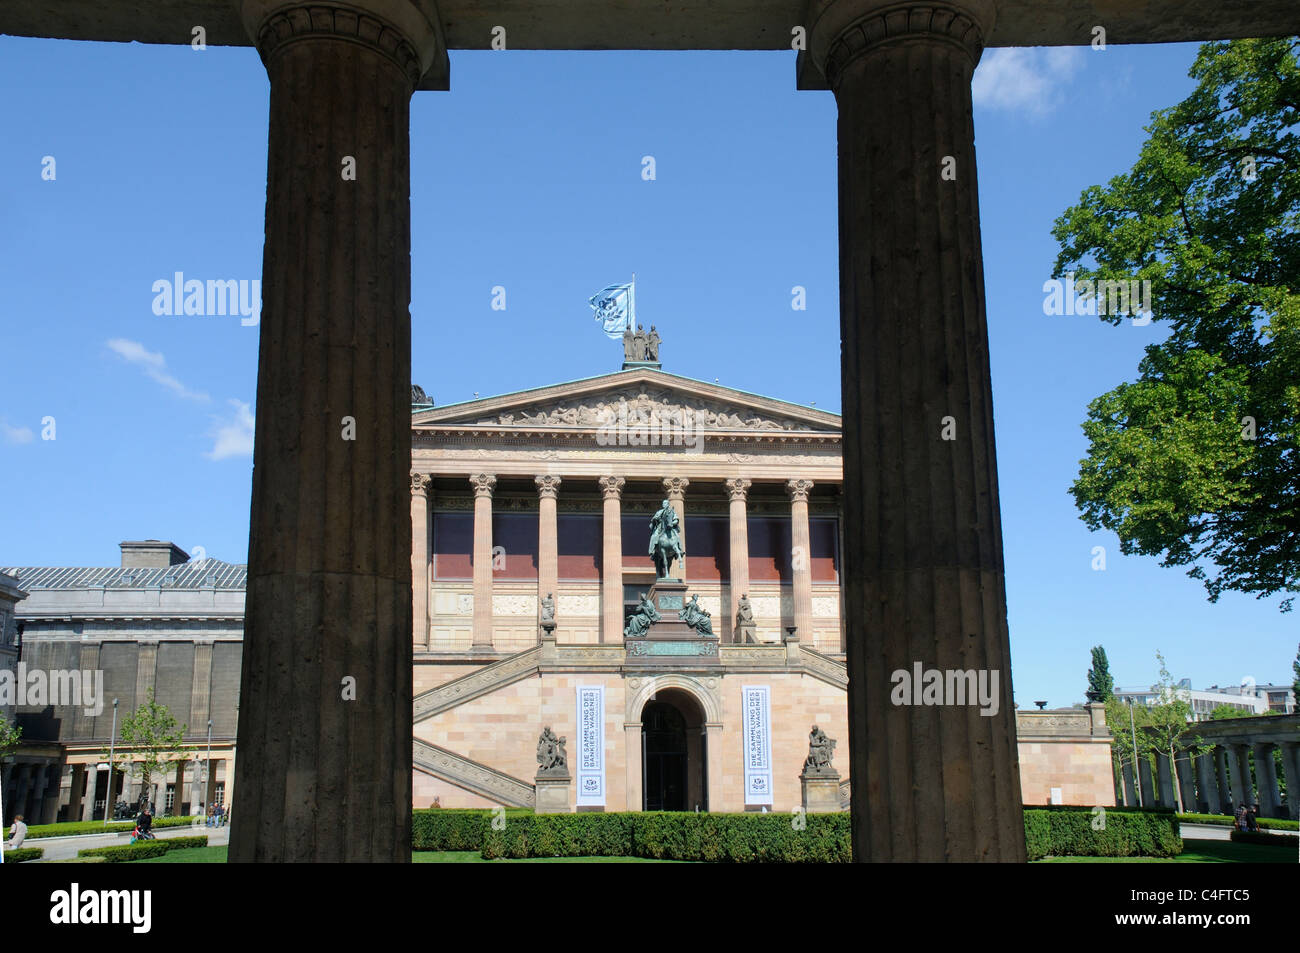 The National Gallery of Berlin Stock Photo